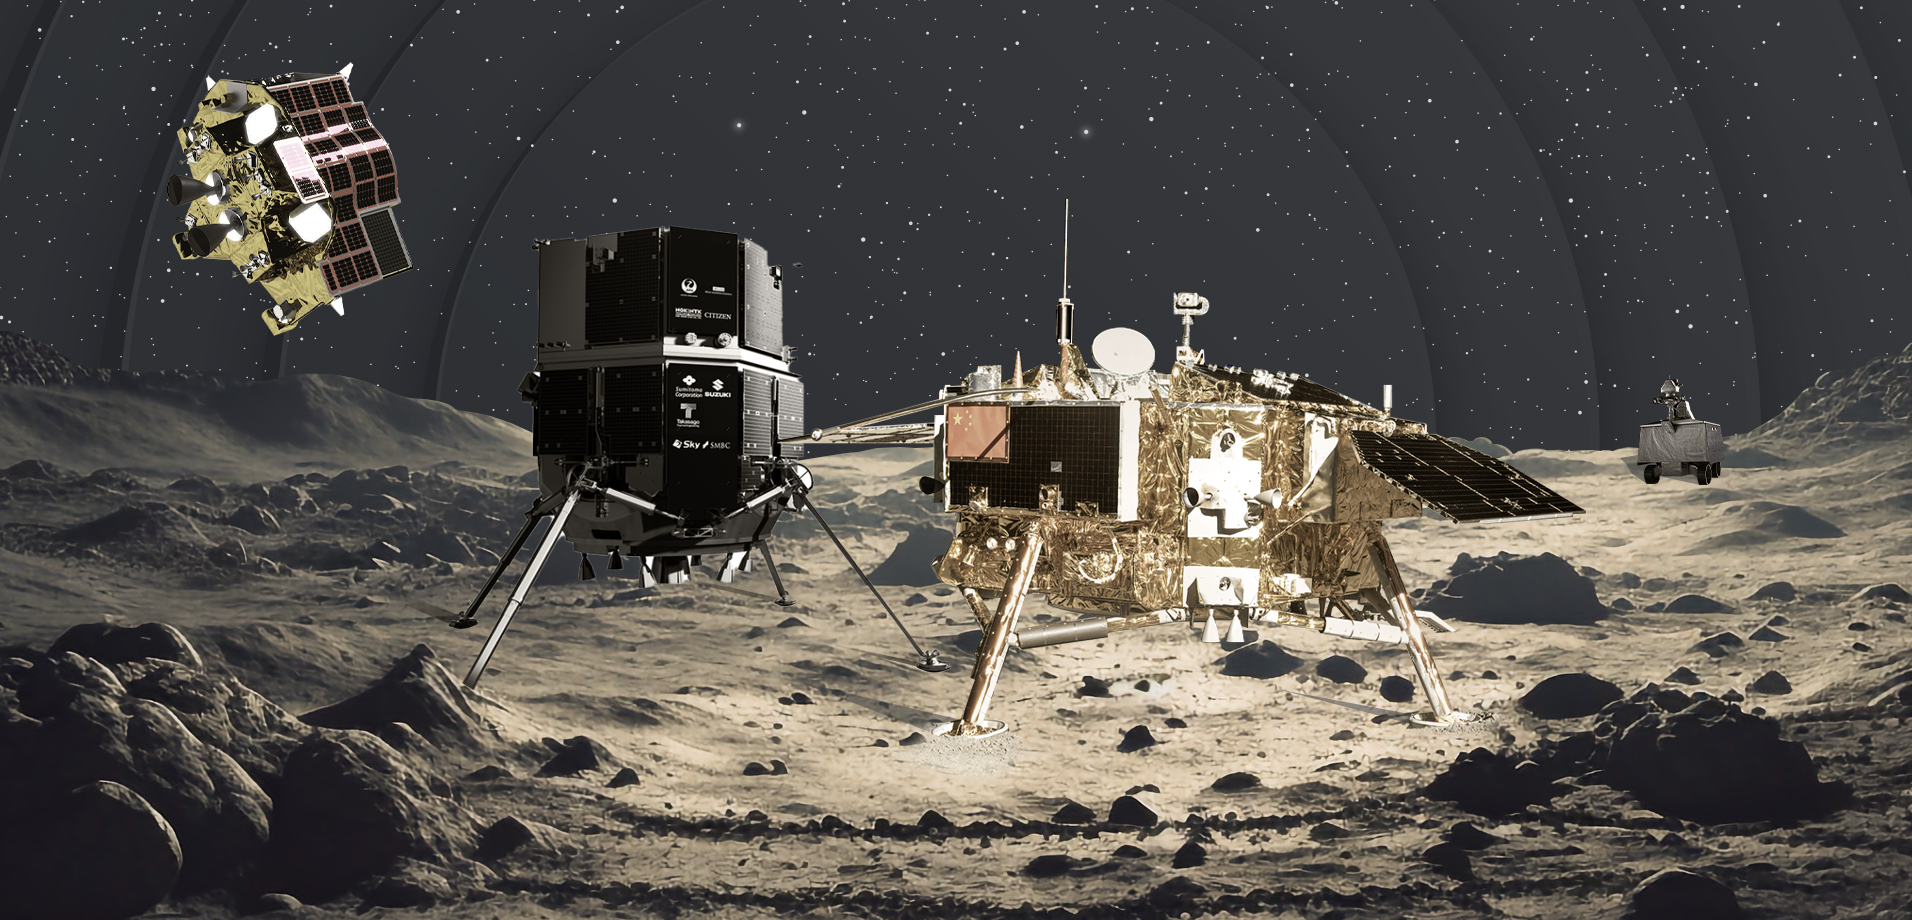 Lunar Rovers of Today and Tomorrow: Who’s Exploring the Moon?